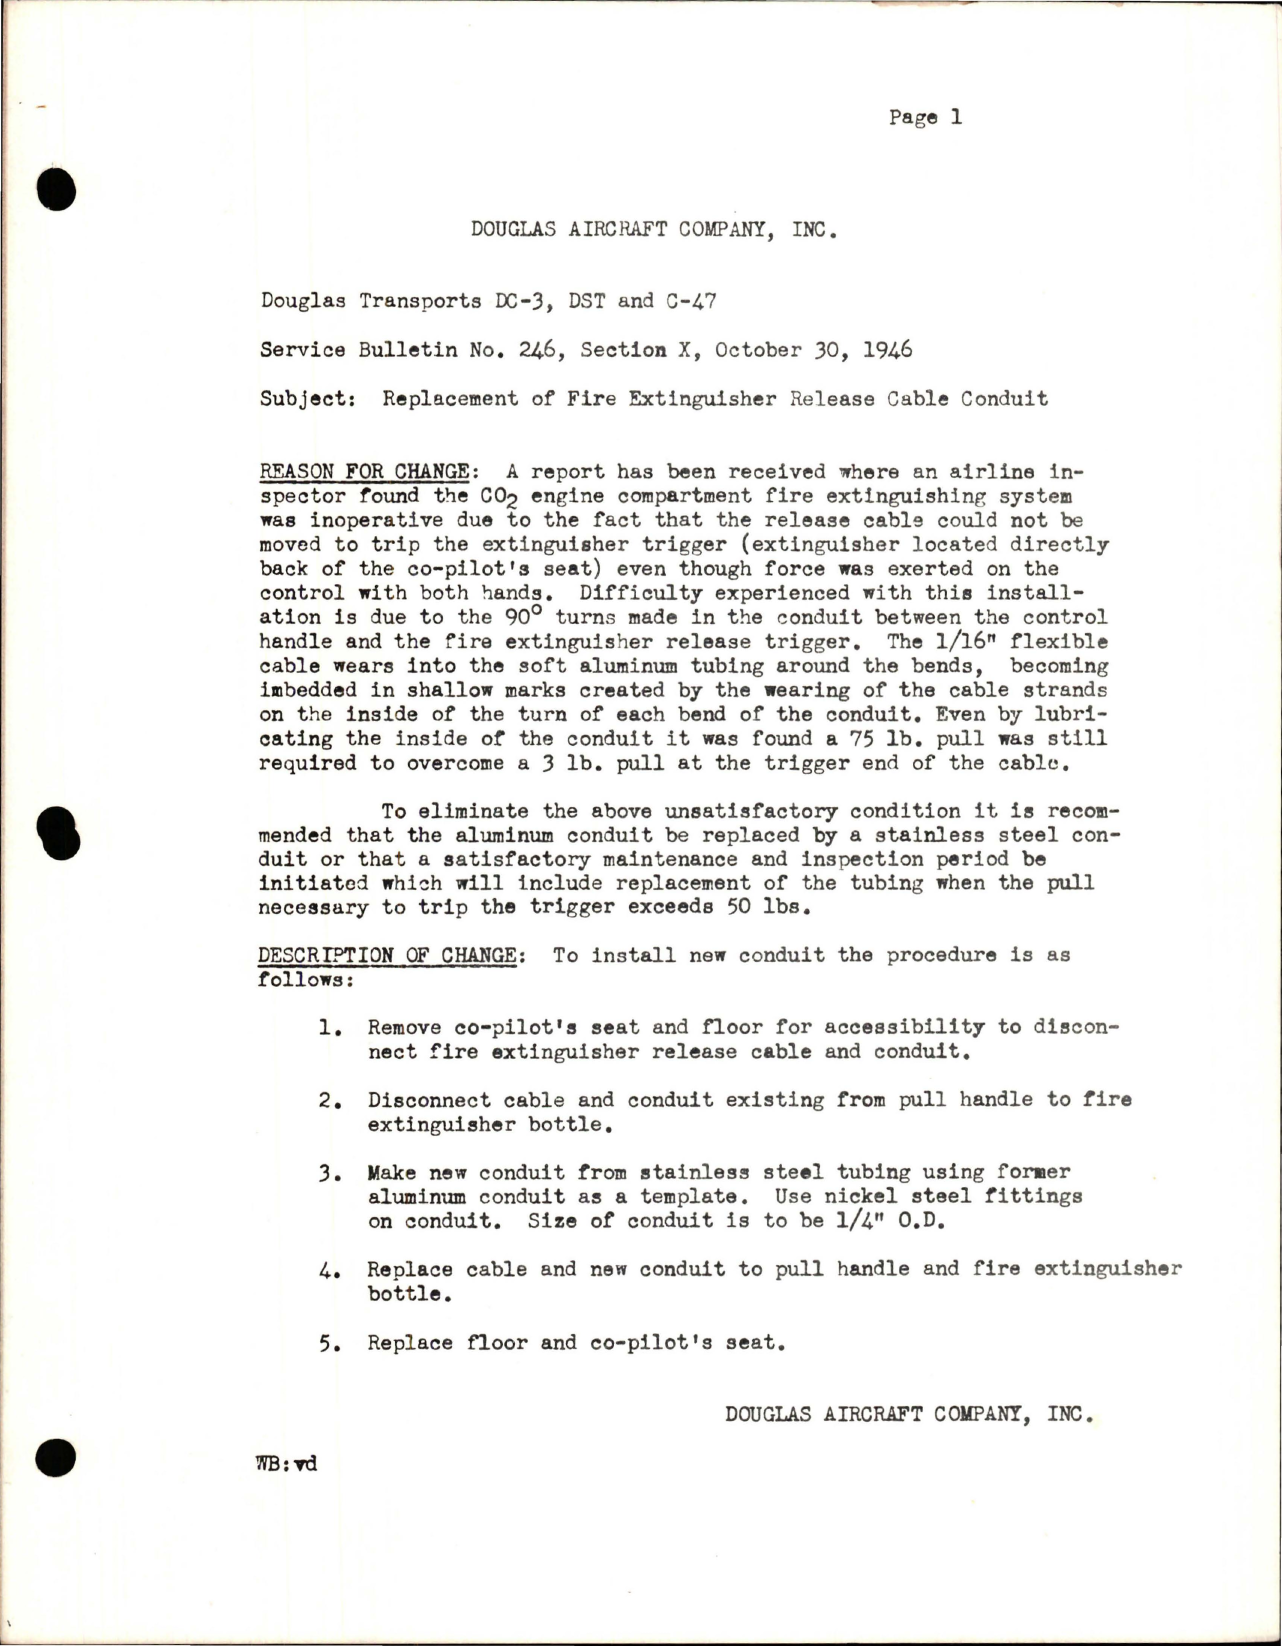 Sample page 1 from AirCorps Library document: Replacement of Fire Extinguisher Release Cable Conduit